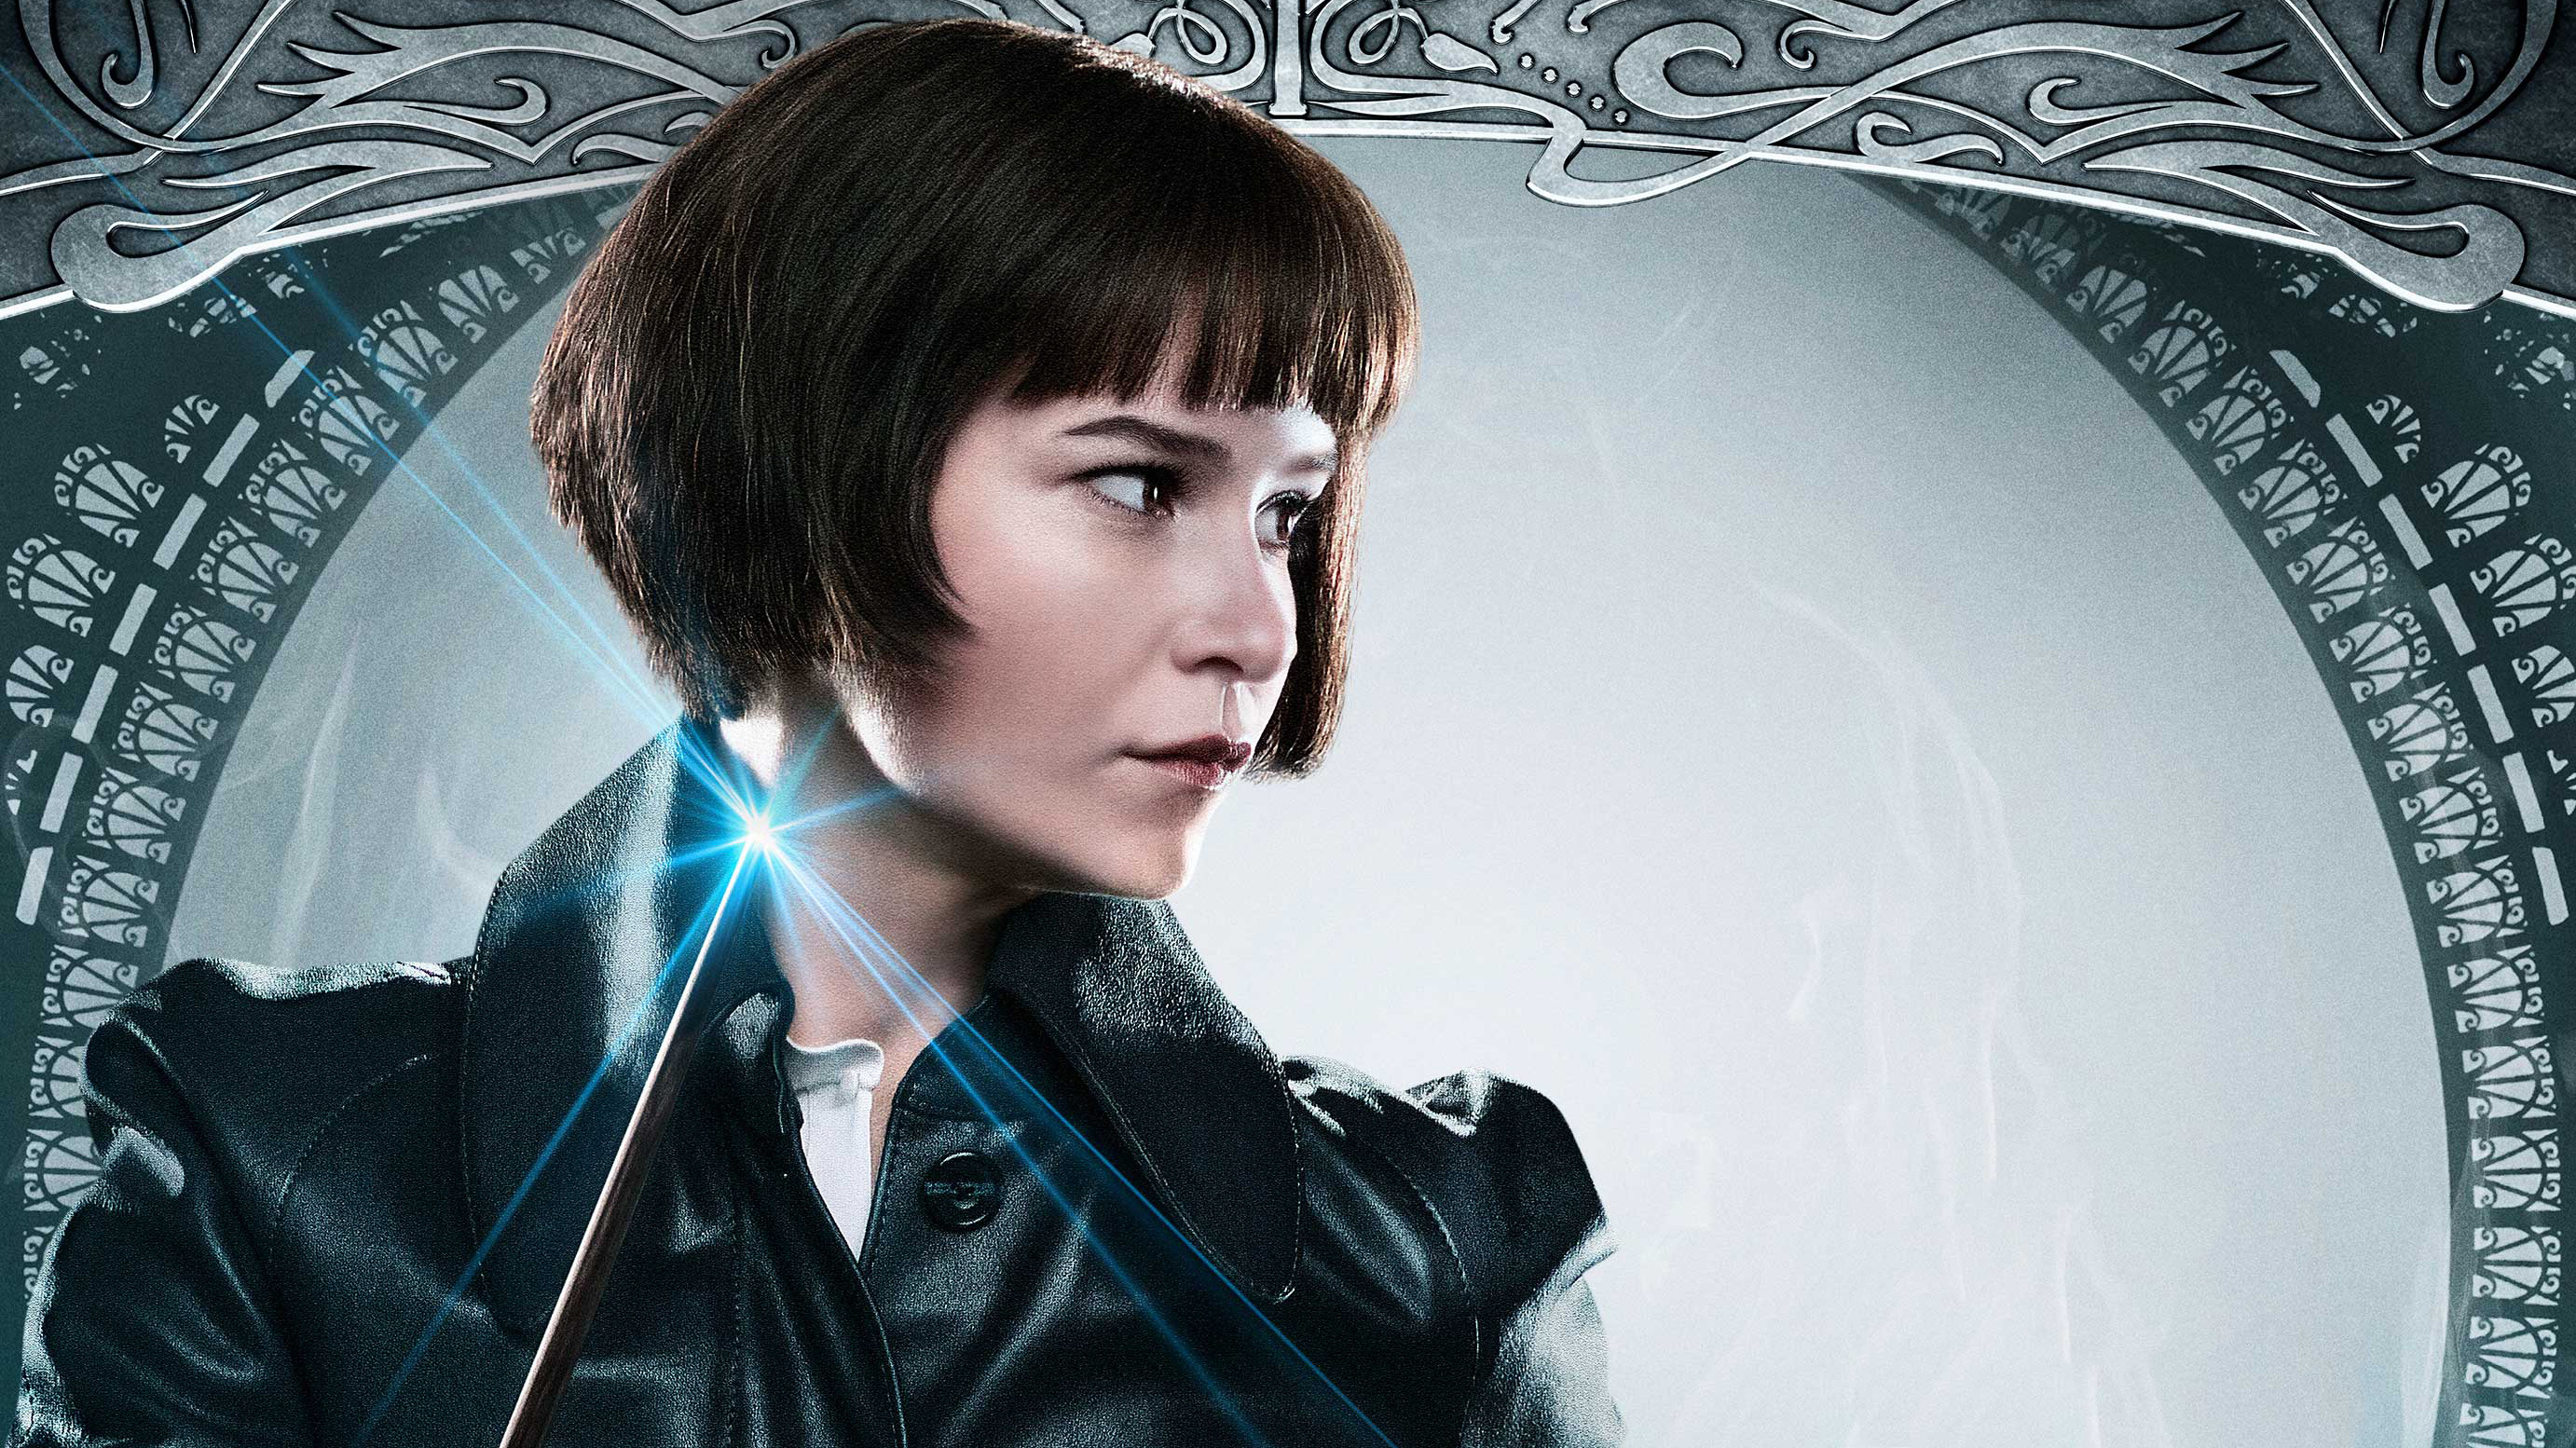 Katherine Waterston: Tina Goldstein, An American half-blood witch and the deuteragonist in the Fantastic Beasts film series. 2770x1560 HD Wallpaper.